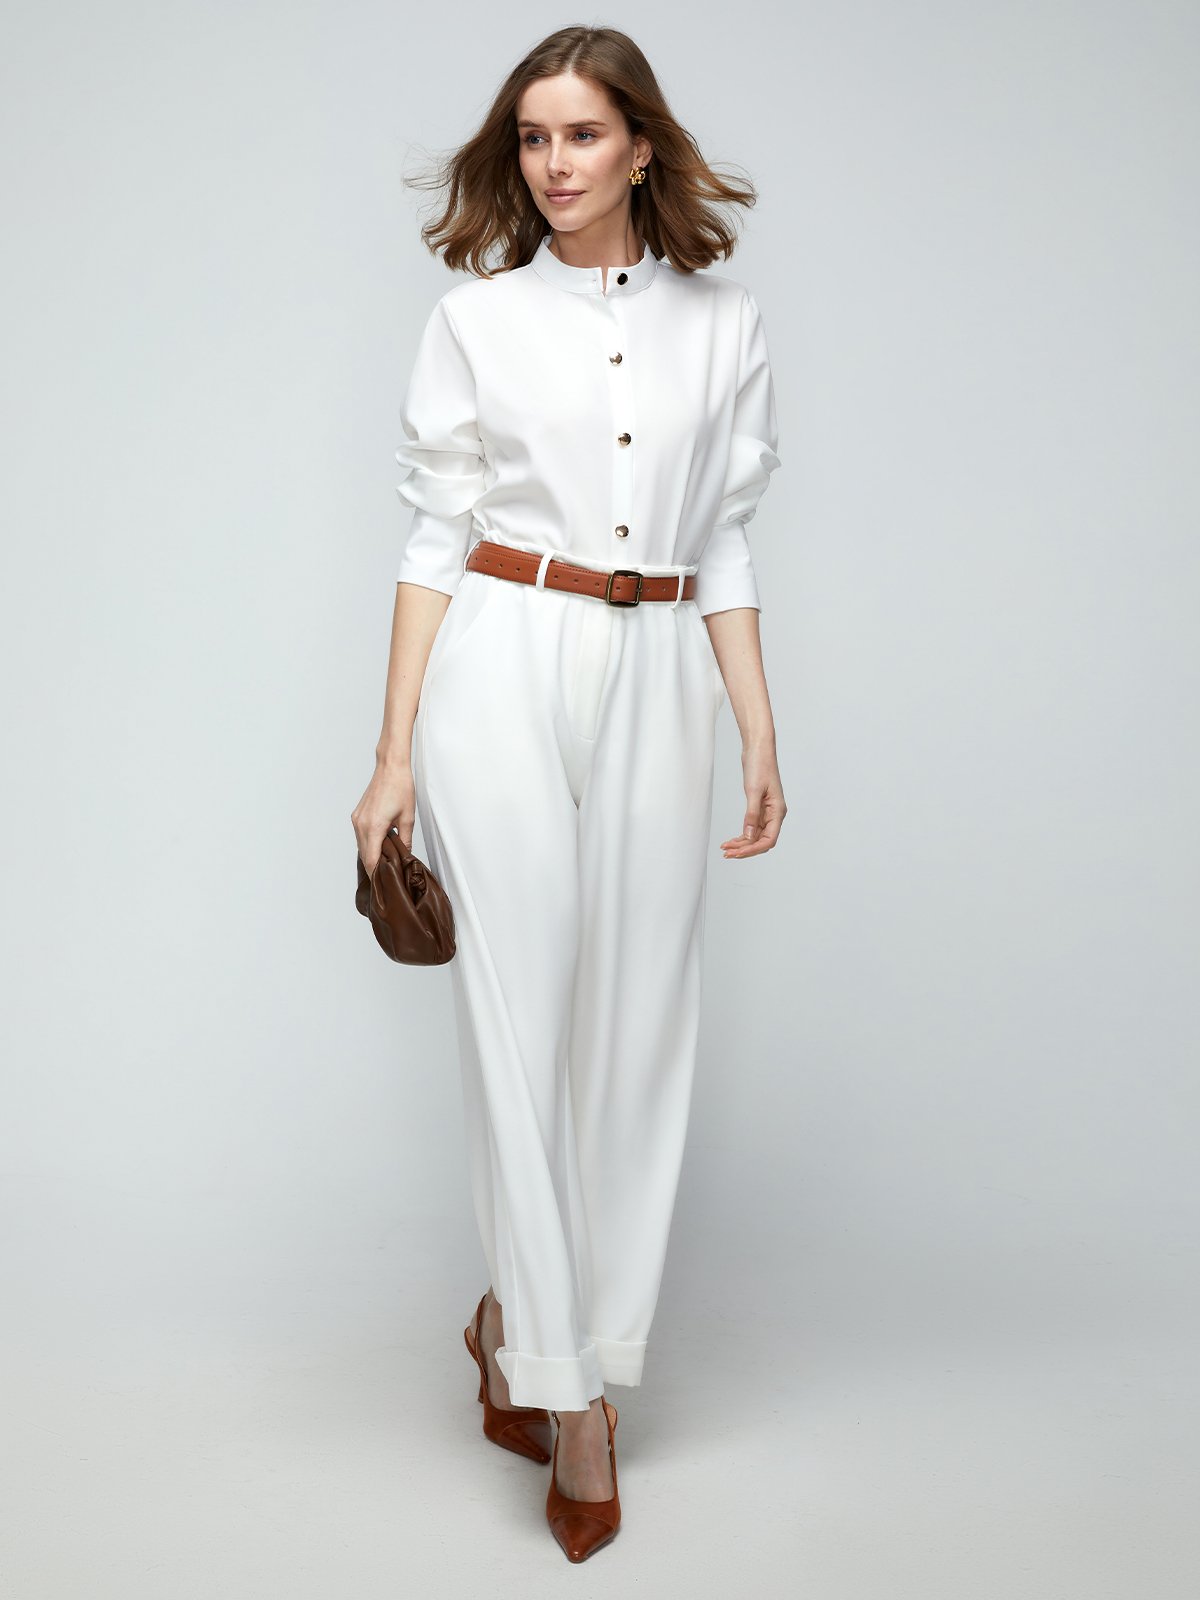 JFN Stand Collar Solid Buttoned Basic Blouse